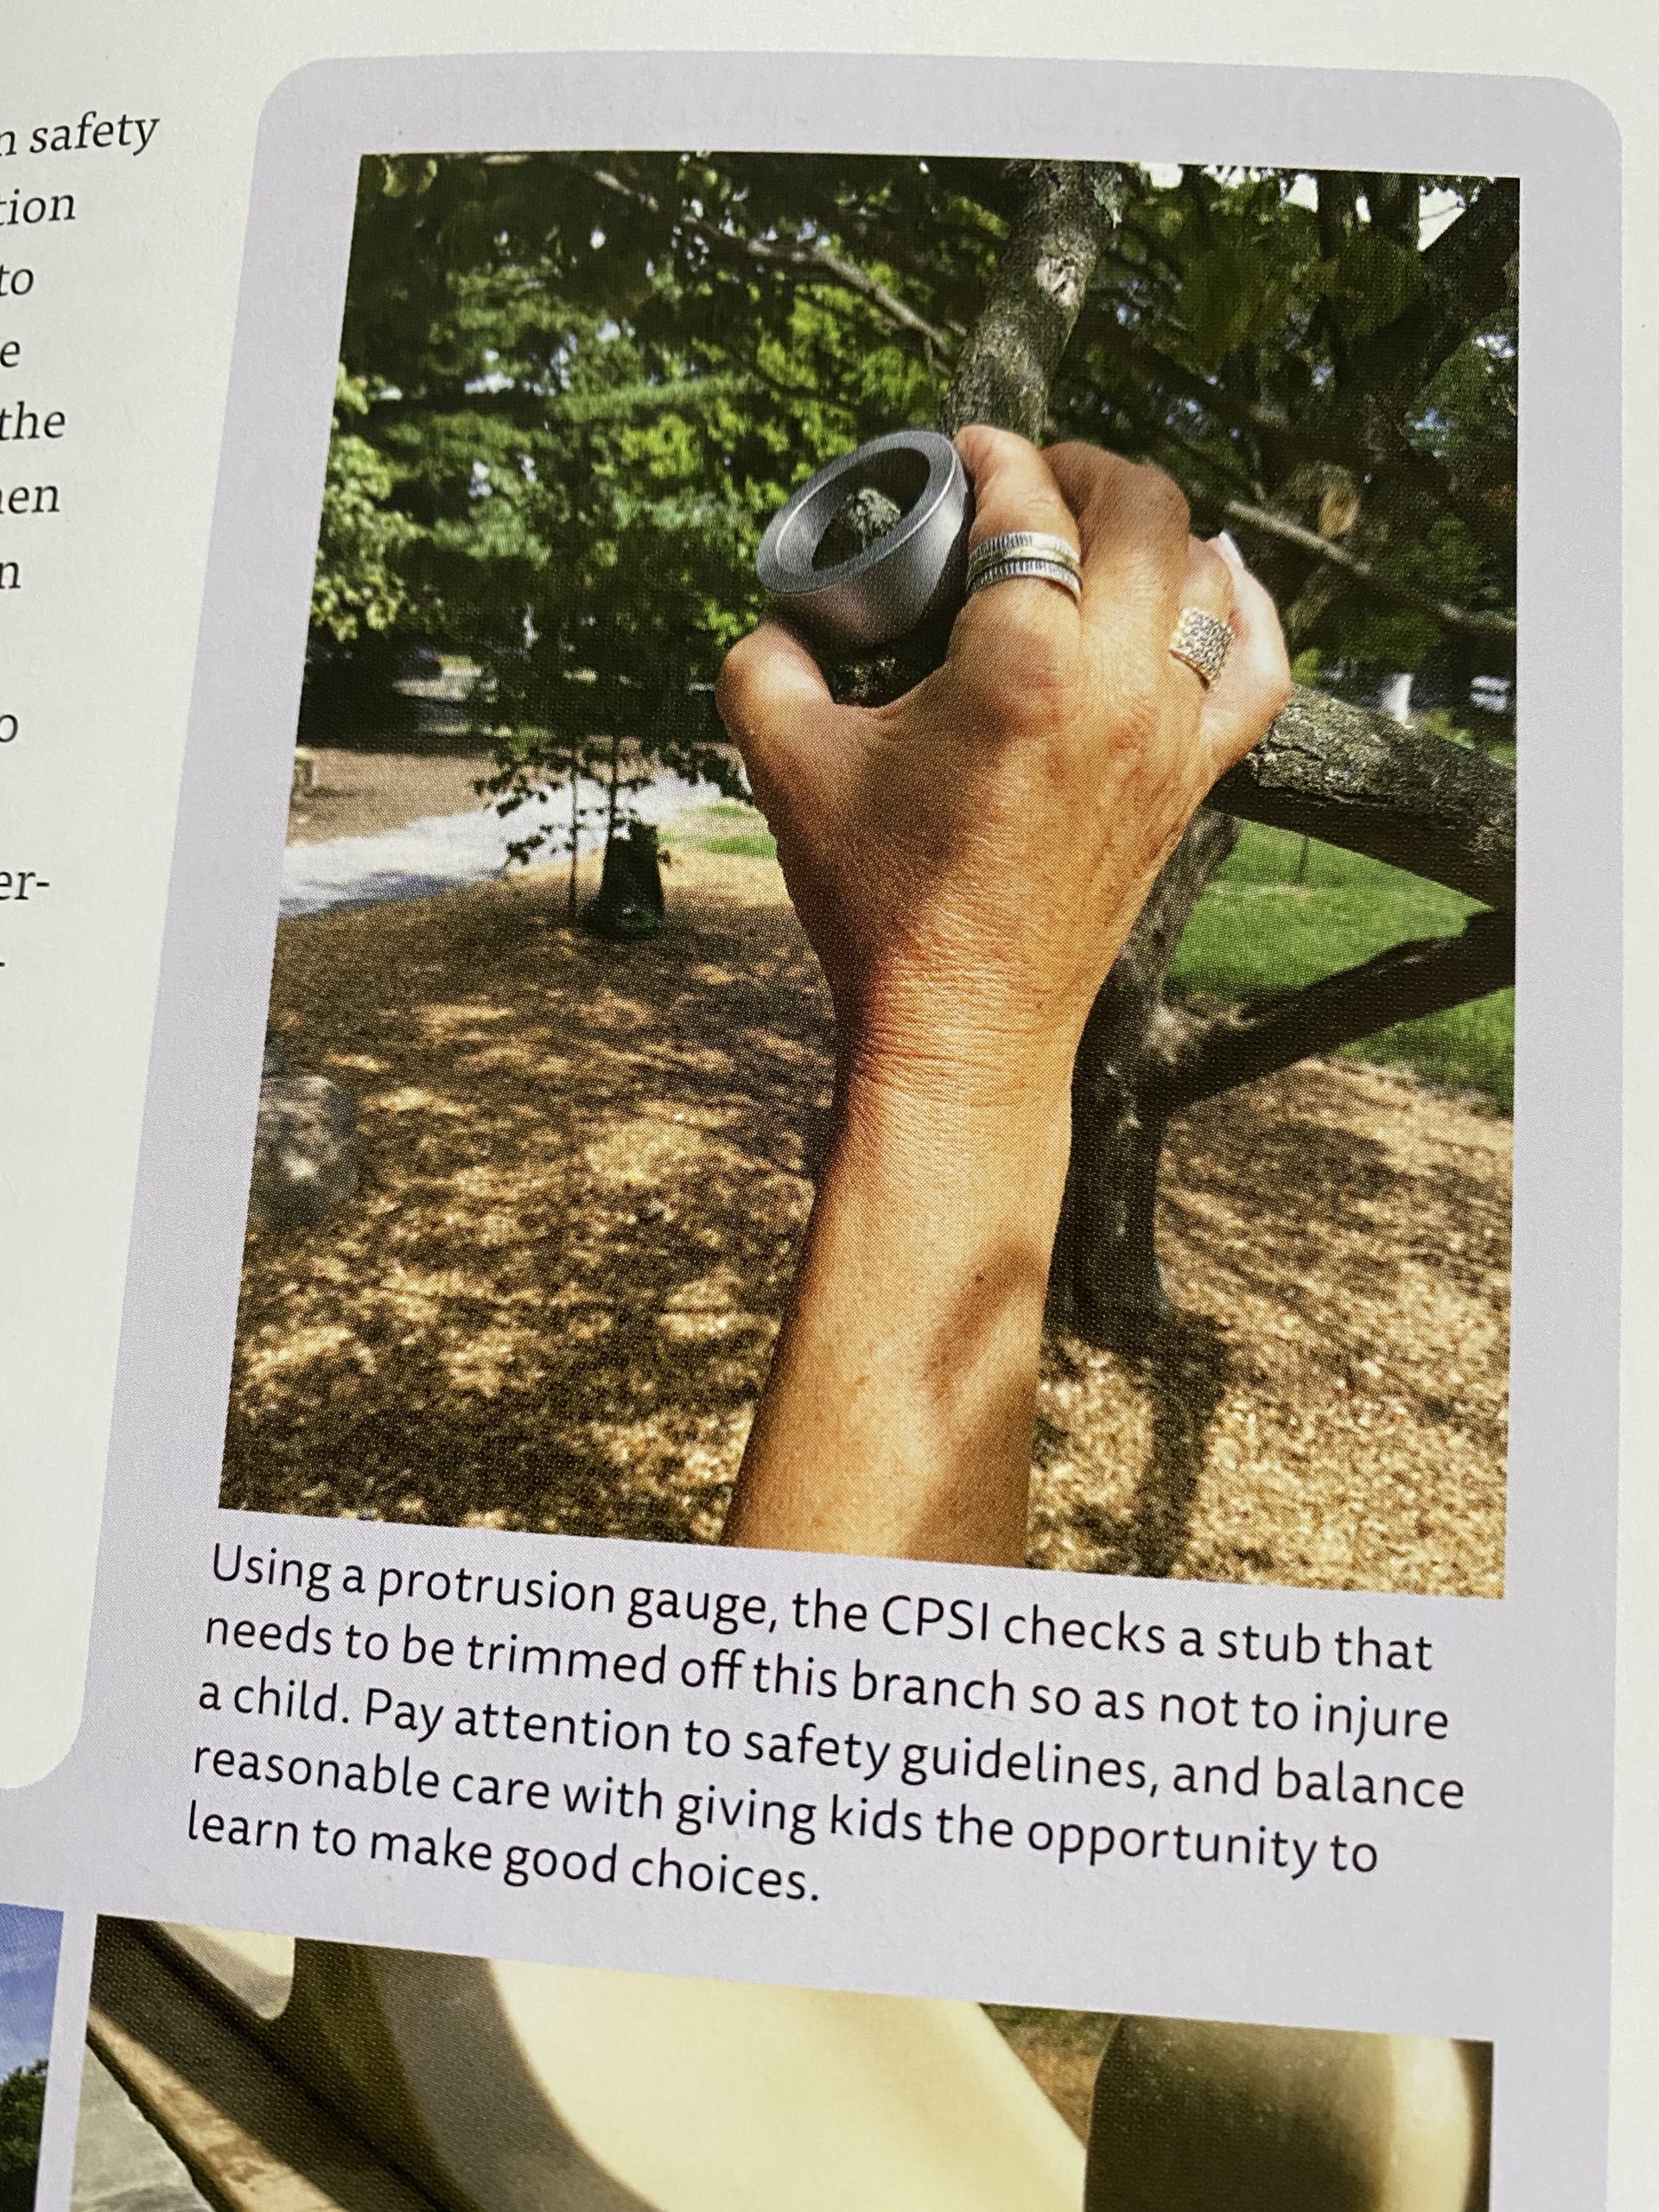 using a protrusion gauge, the CPSI checks a stub that needs to be trimmed off this branch so as not to injure a child. Pay attention to safety guidelines, and balance reasonable care with giving kids the opportunity to learn to make good choices